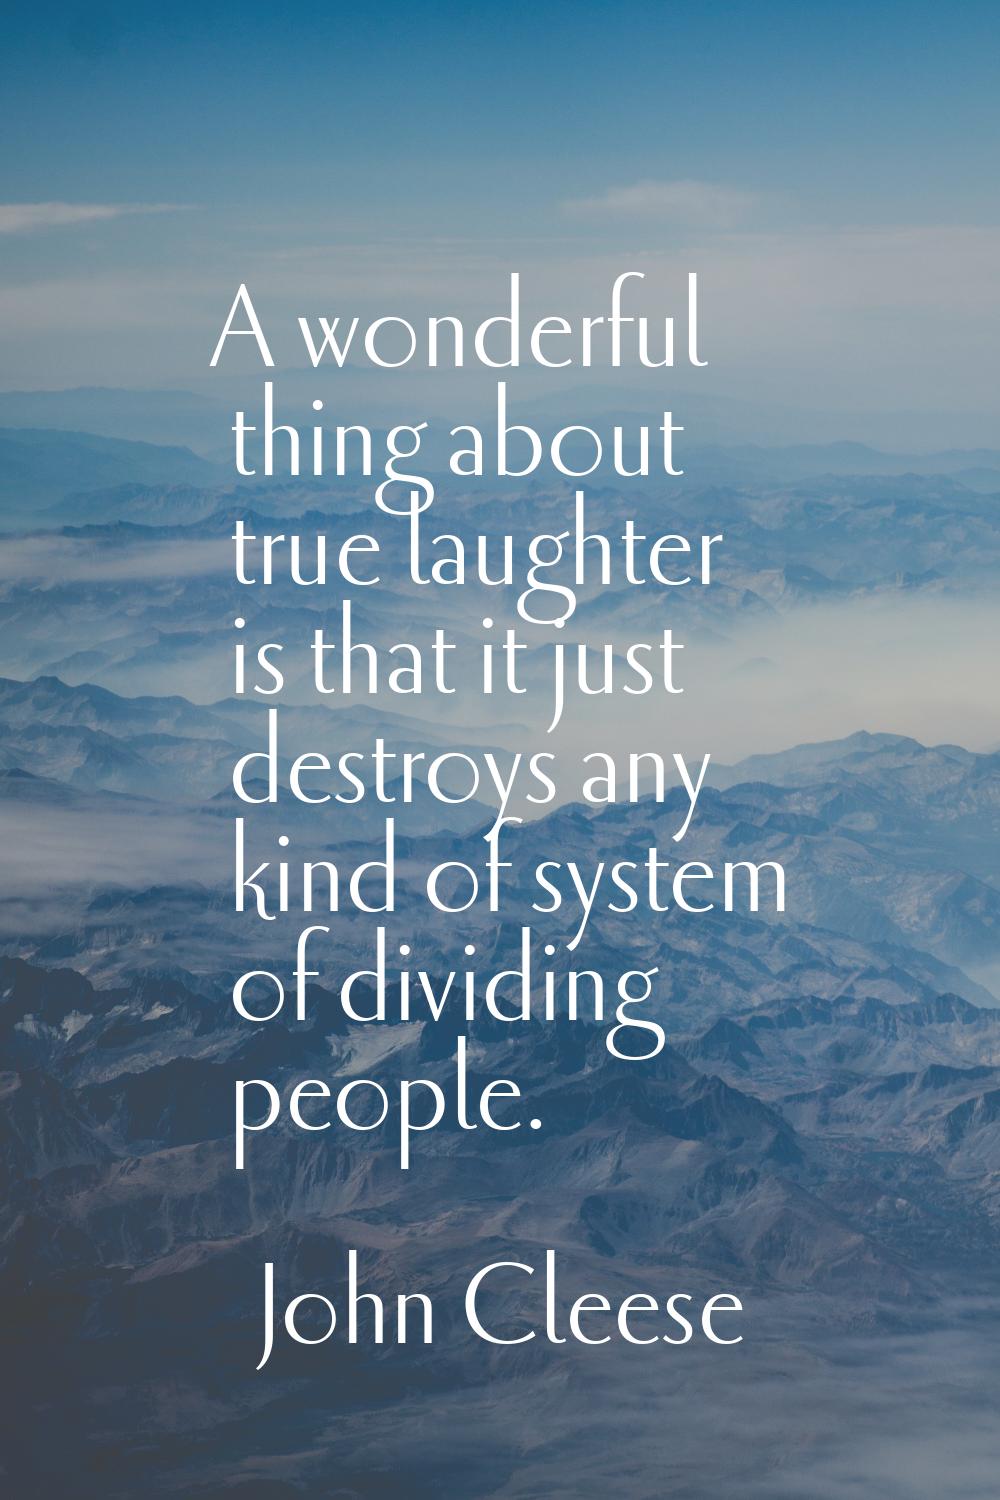 A wonderful thing about true laughter is that it just destroys any kind of system of dividing peopl